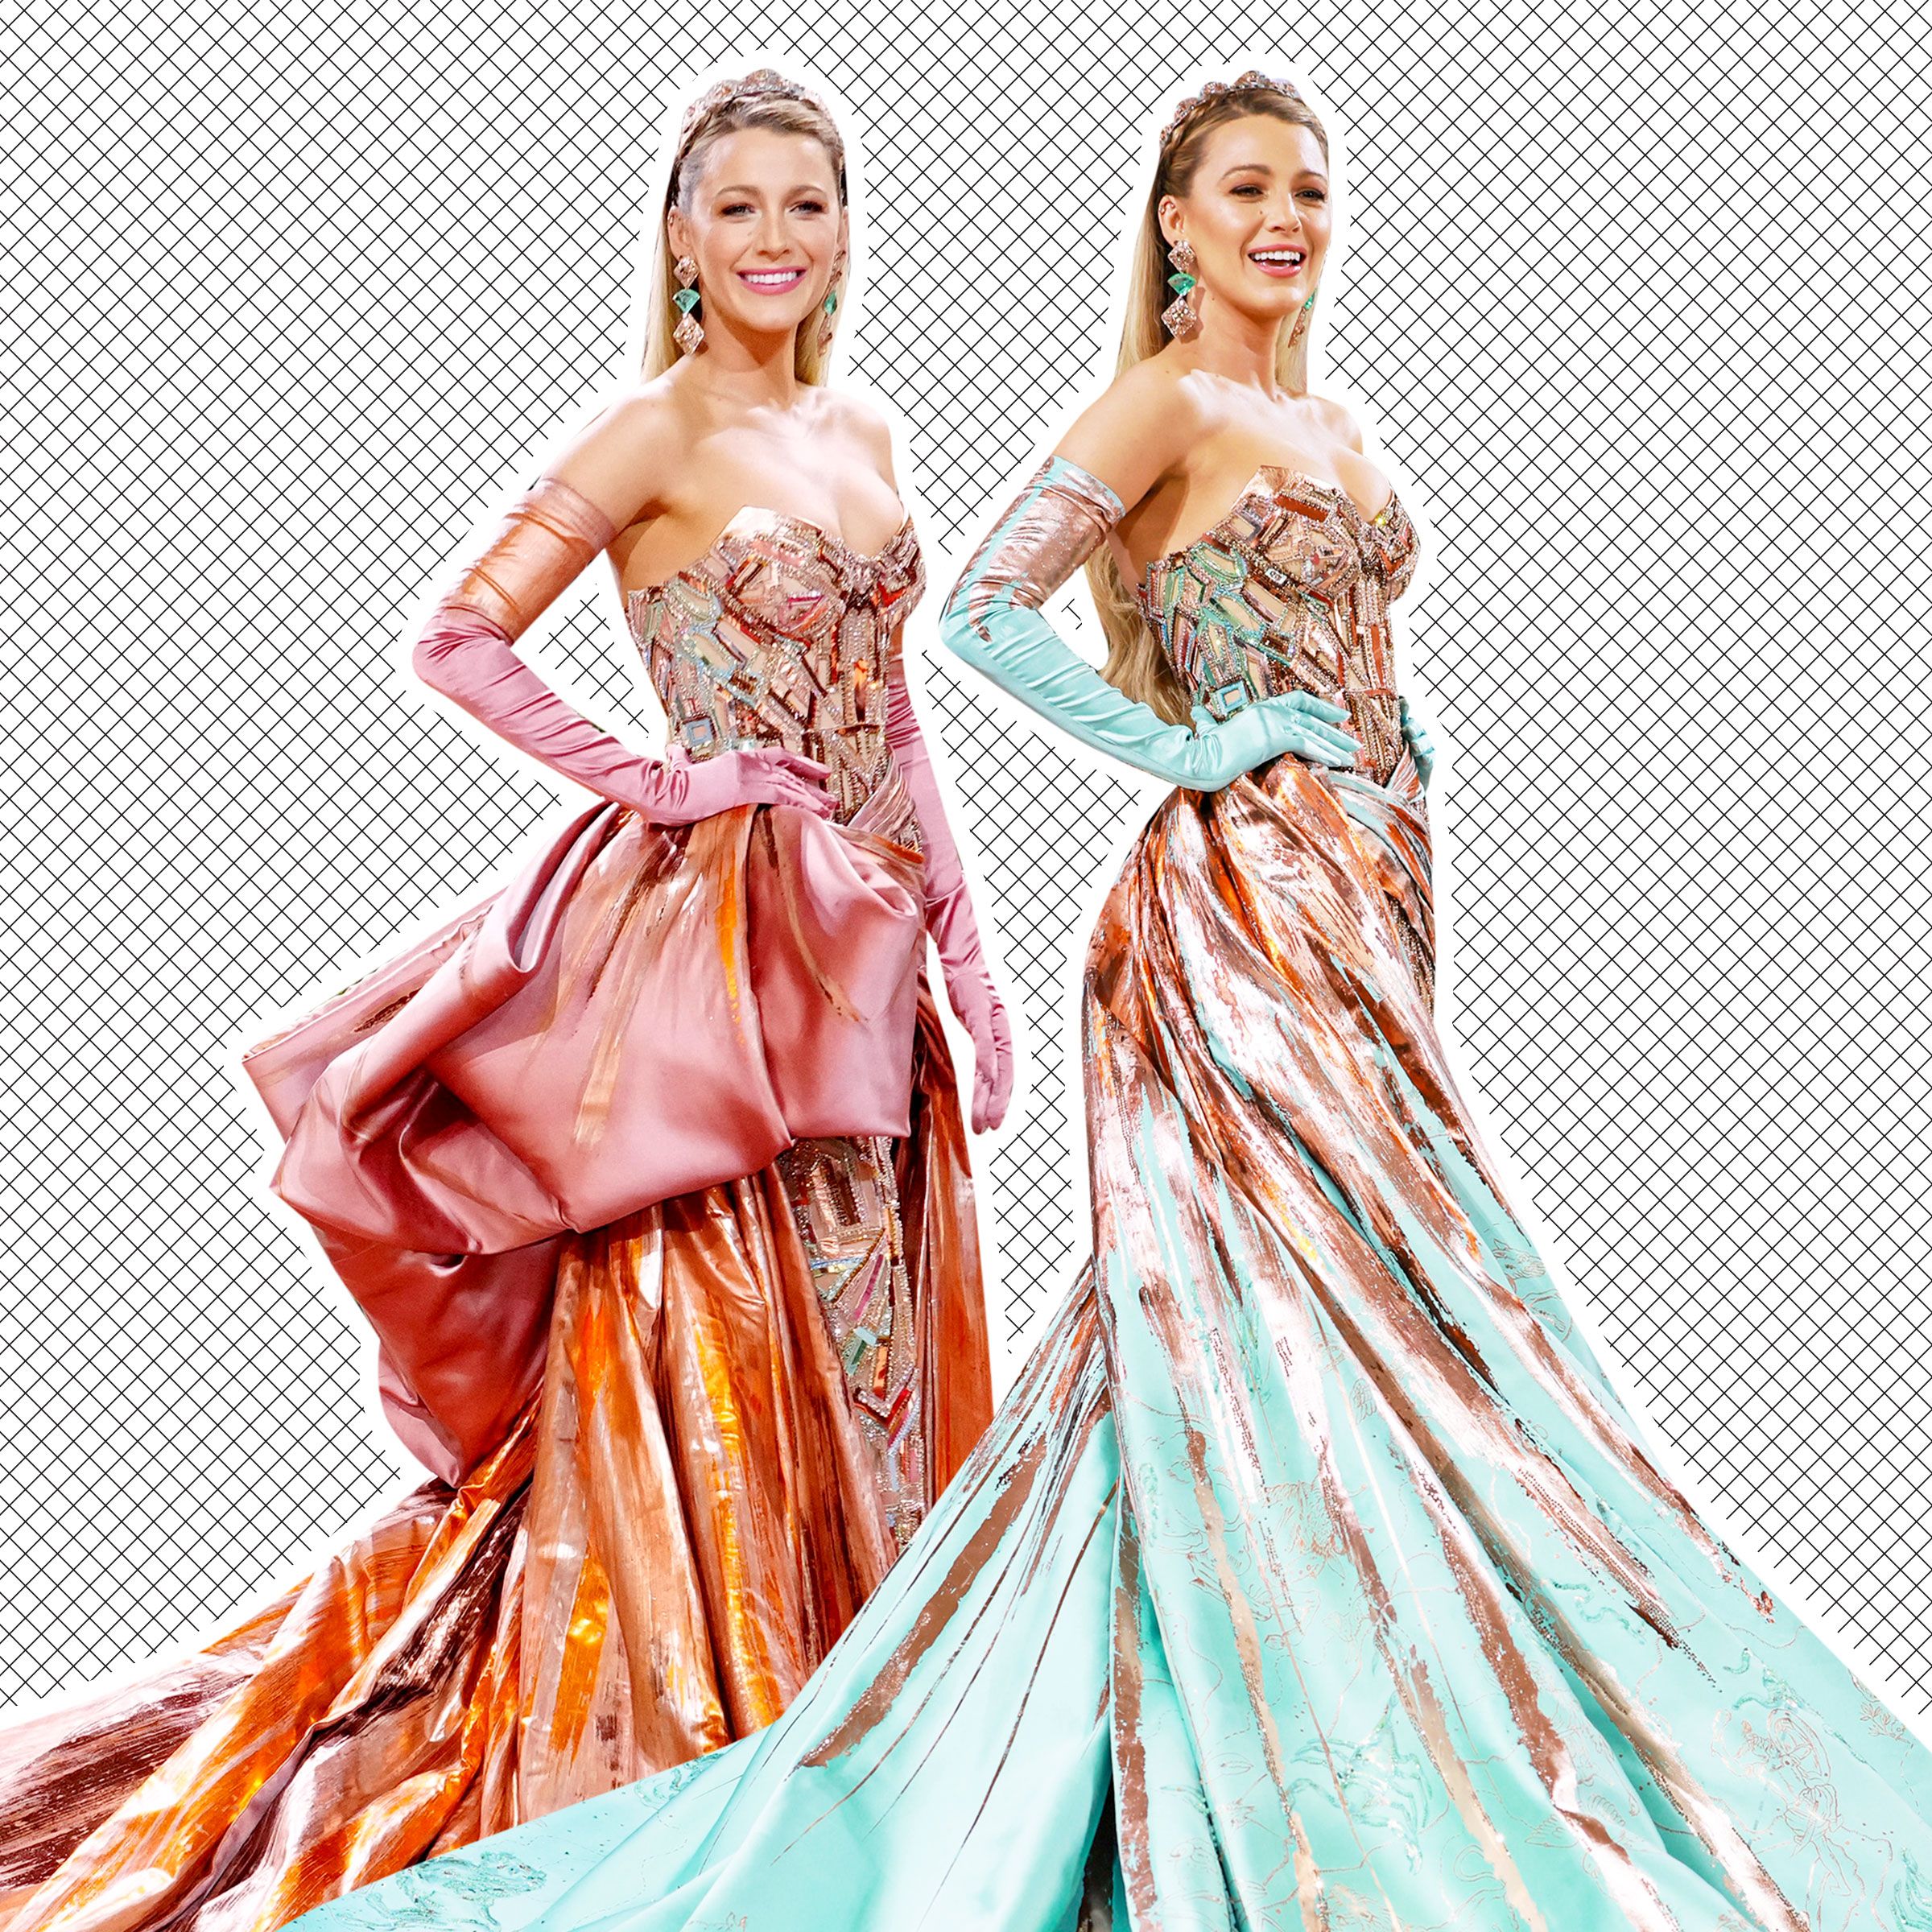 How Does Blake Lively's Met Gala 2022 Dress Work?